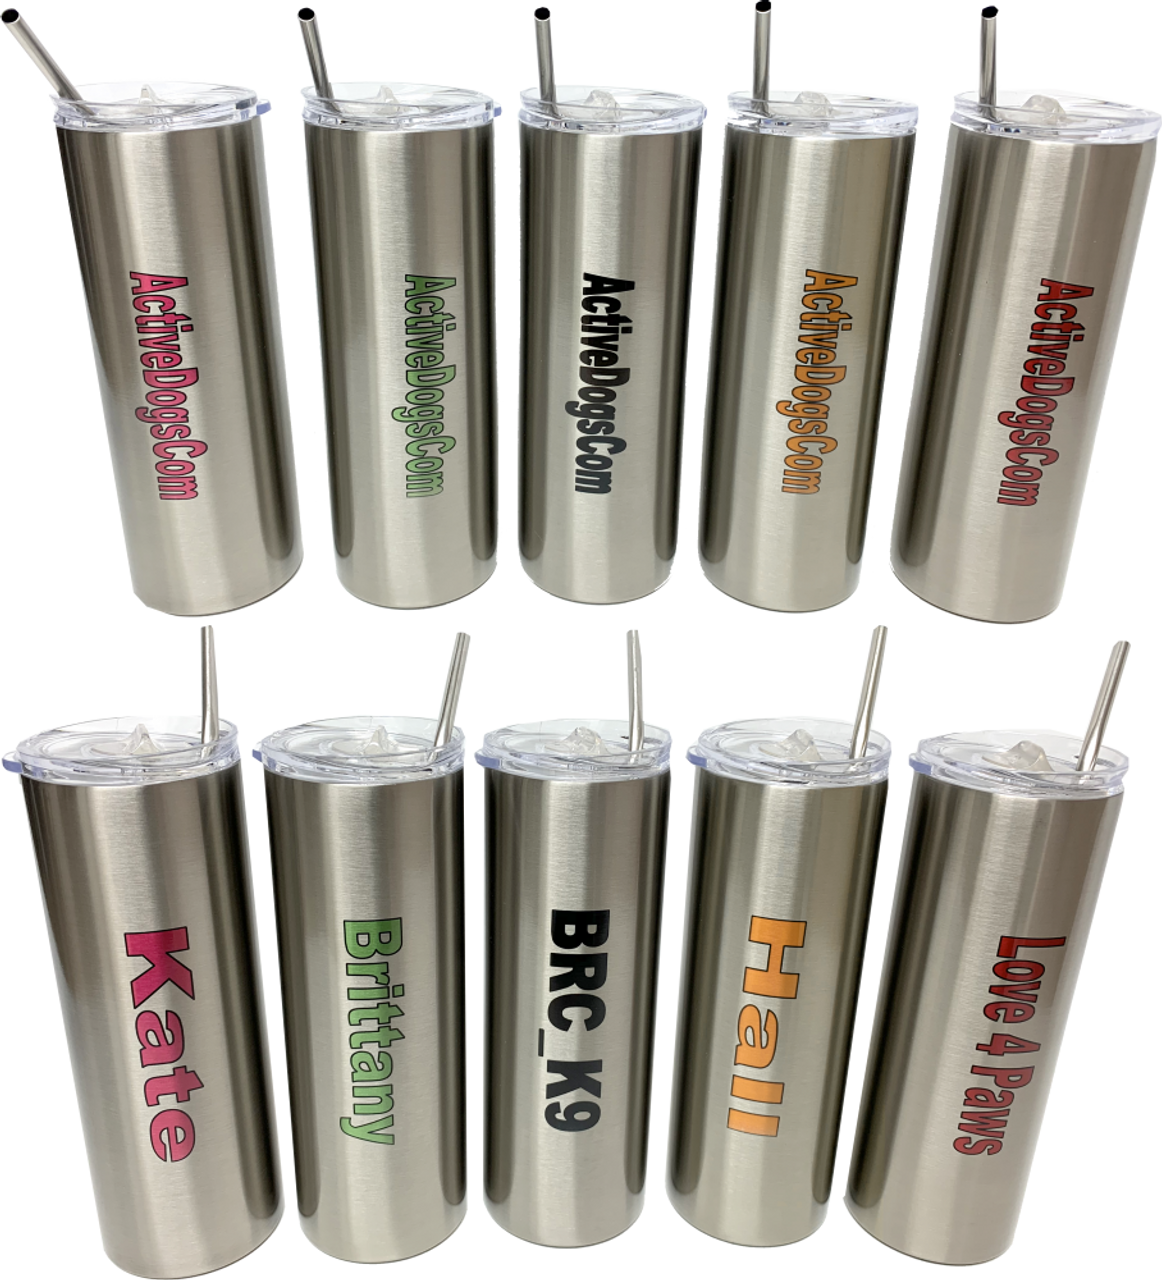 ActiveDogsCom Logo Personalized Stainless Steel Tumbler w/ metal straw 20oz